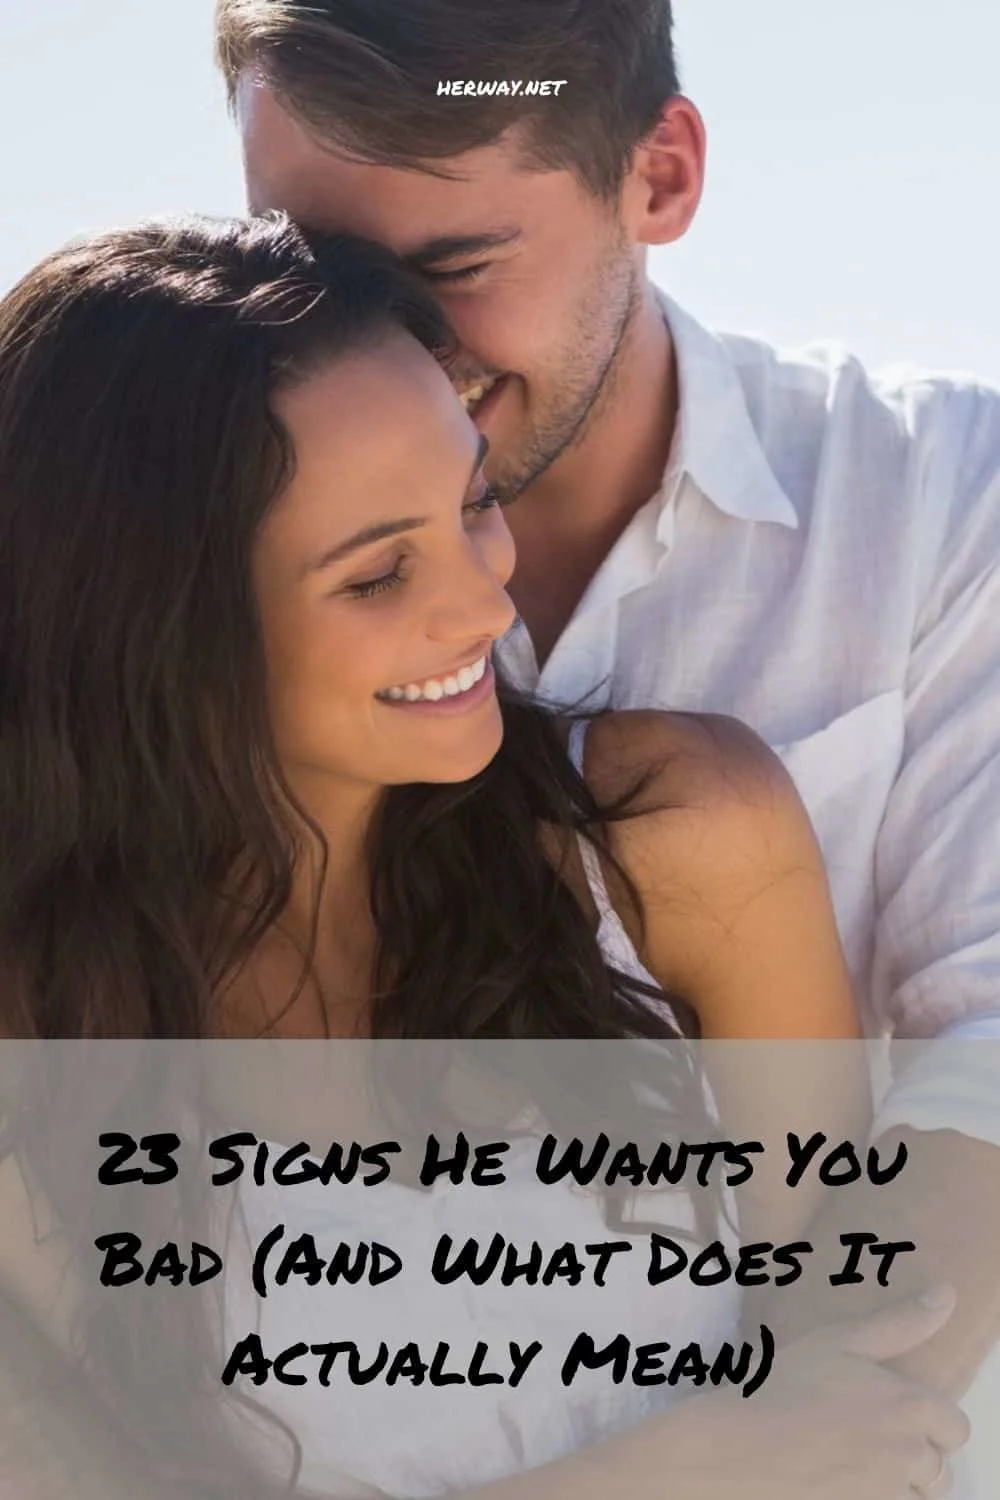 23 Signs He Wants You Bad (And What Does It Actually Mean)